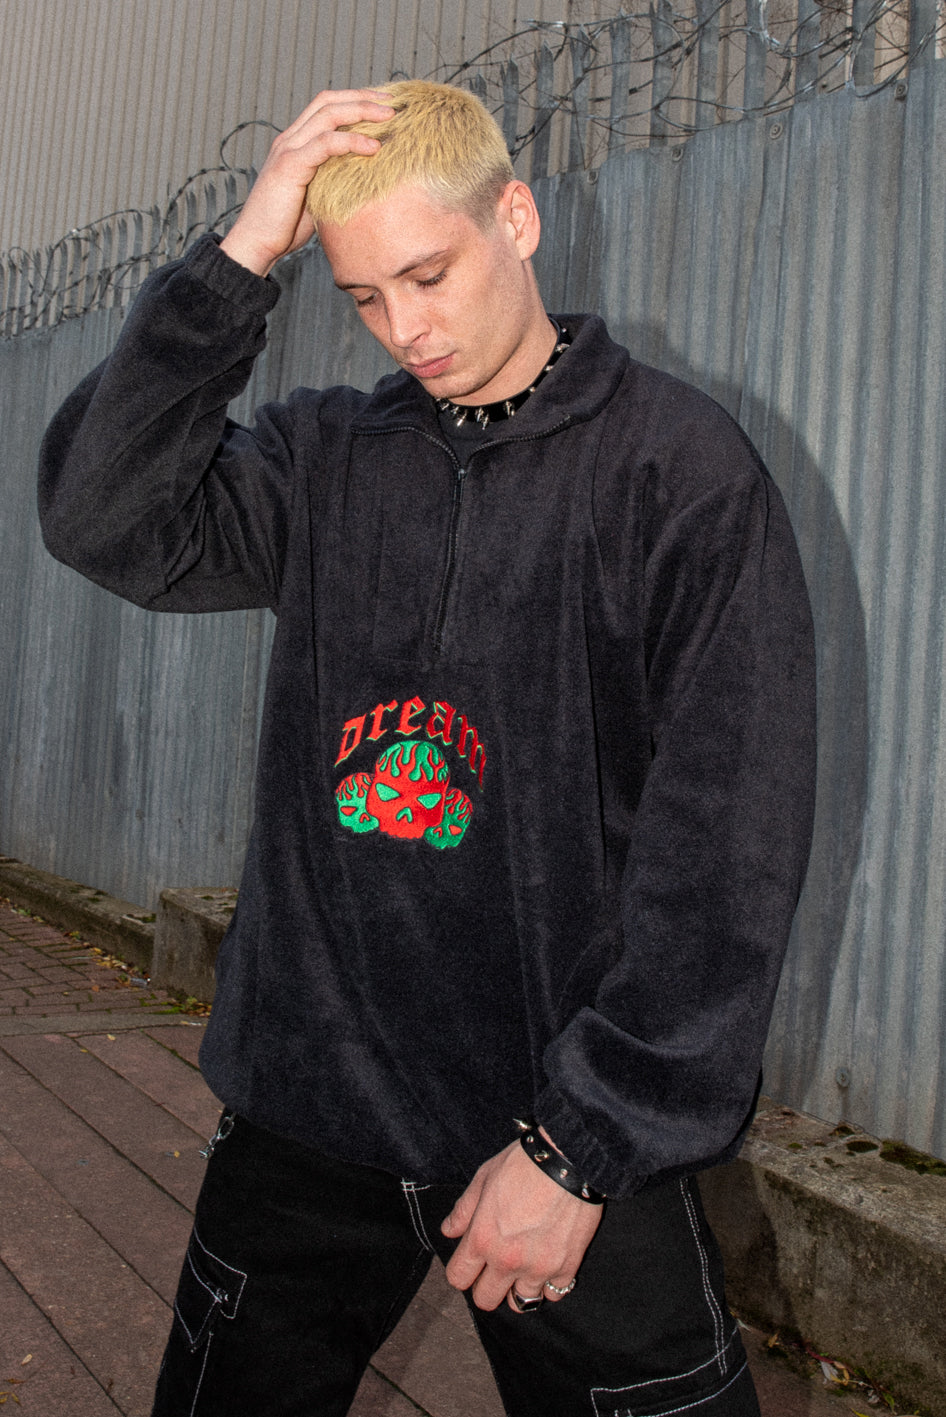 Fleece in Black with Flaming Skull Embroidery